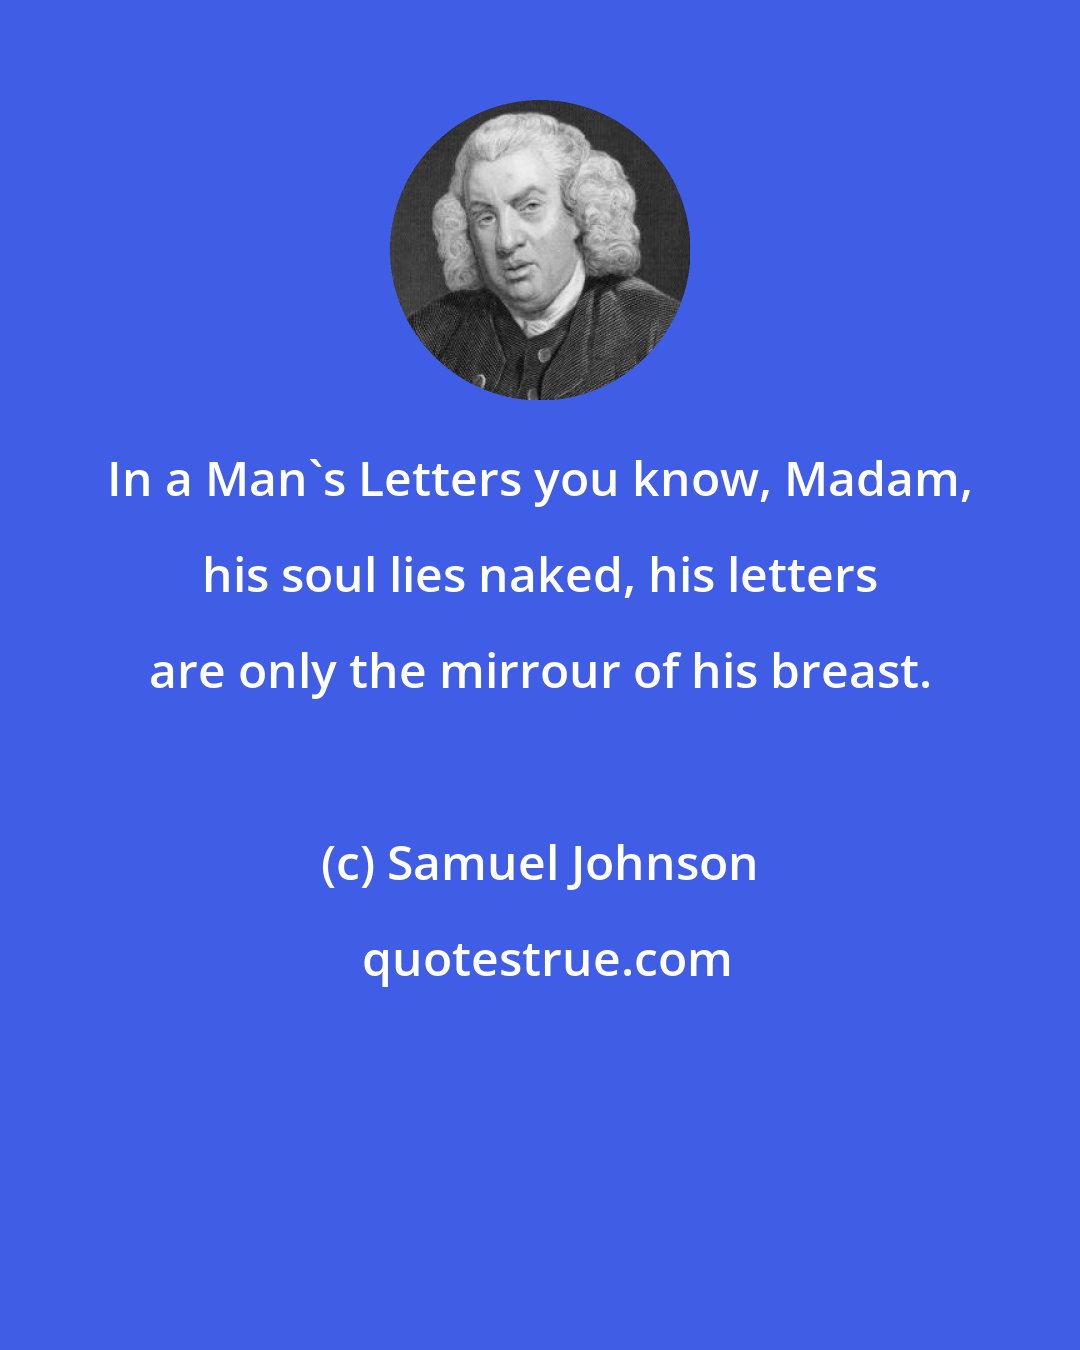 Samuel Johnson: In a Man's Letters you know, Madam, his soul lies naked, his letters are only the mirrour of his breast.